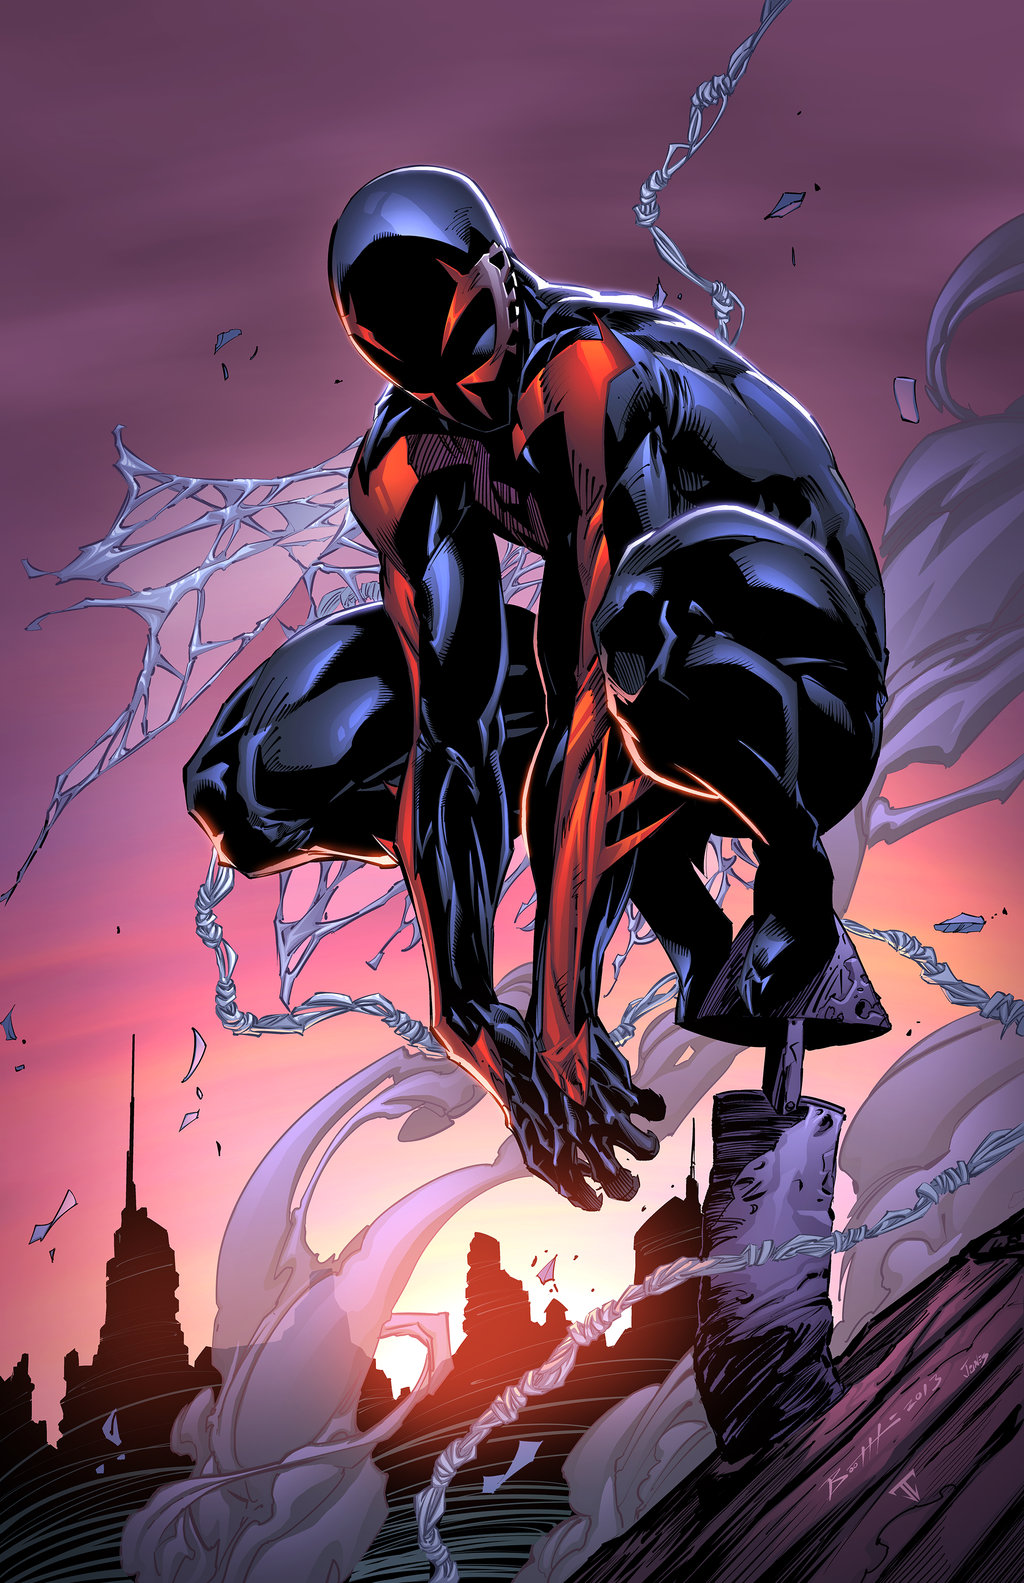 Spiderman 2099 Background Wallpapers 13278 - HD Wallpapers Site